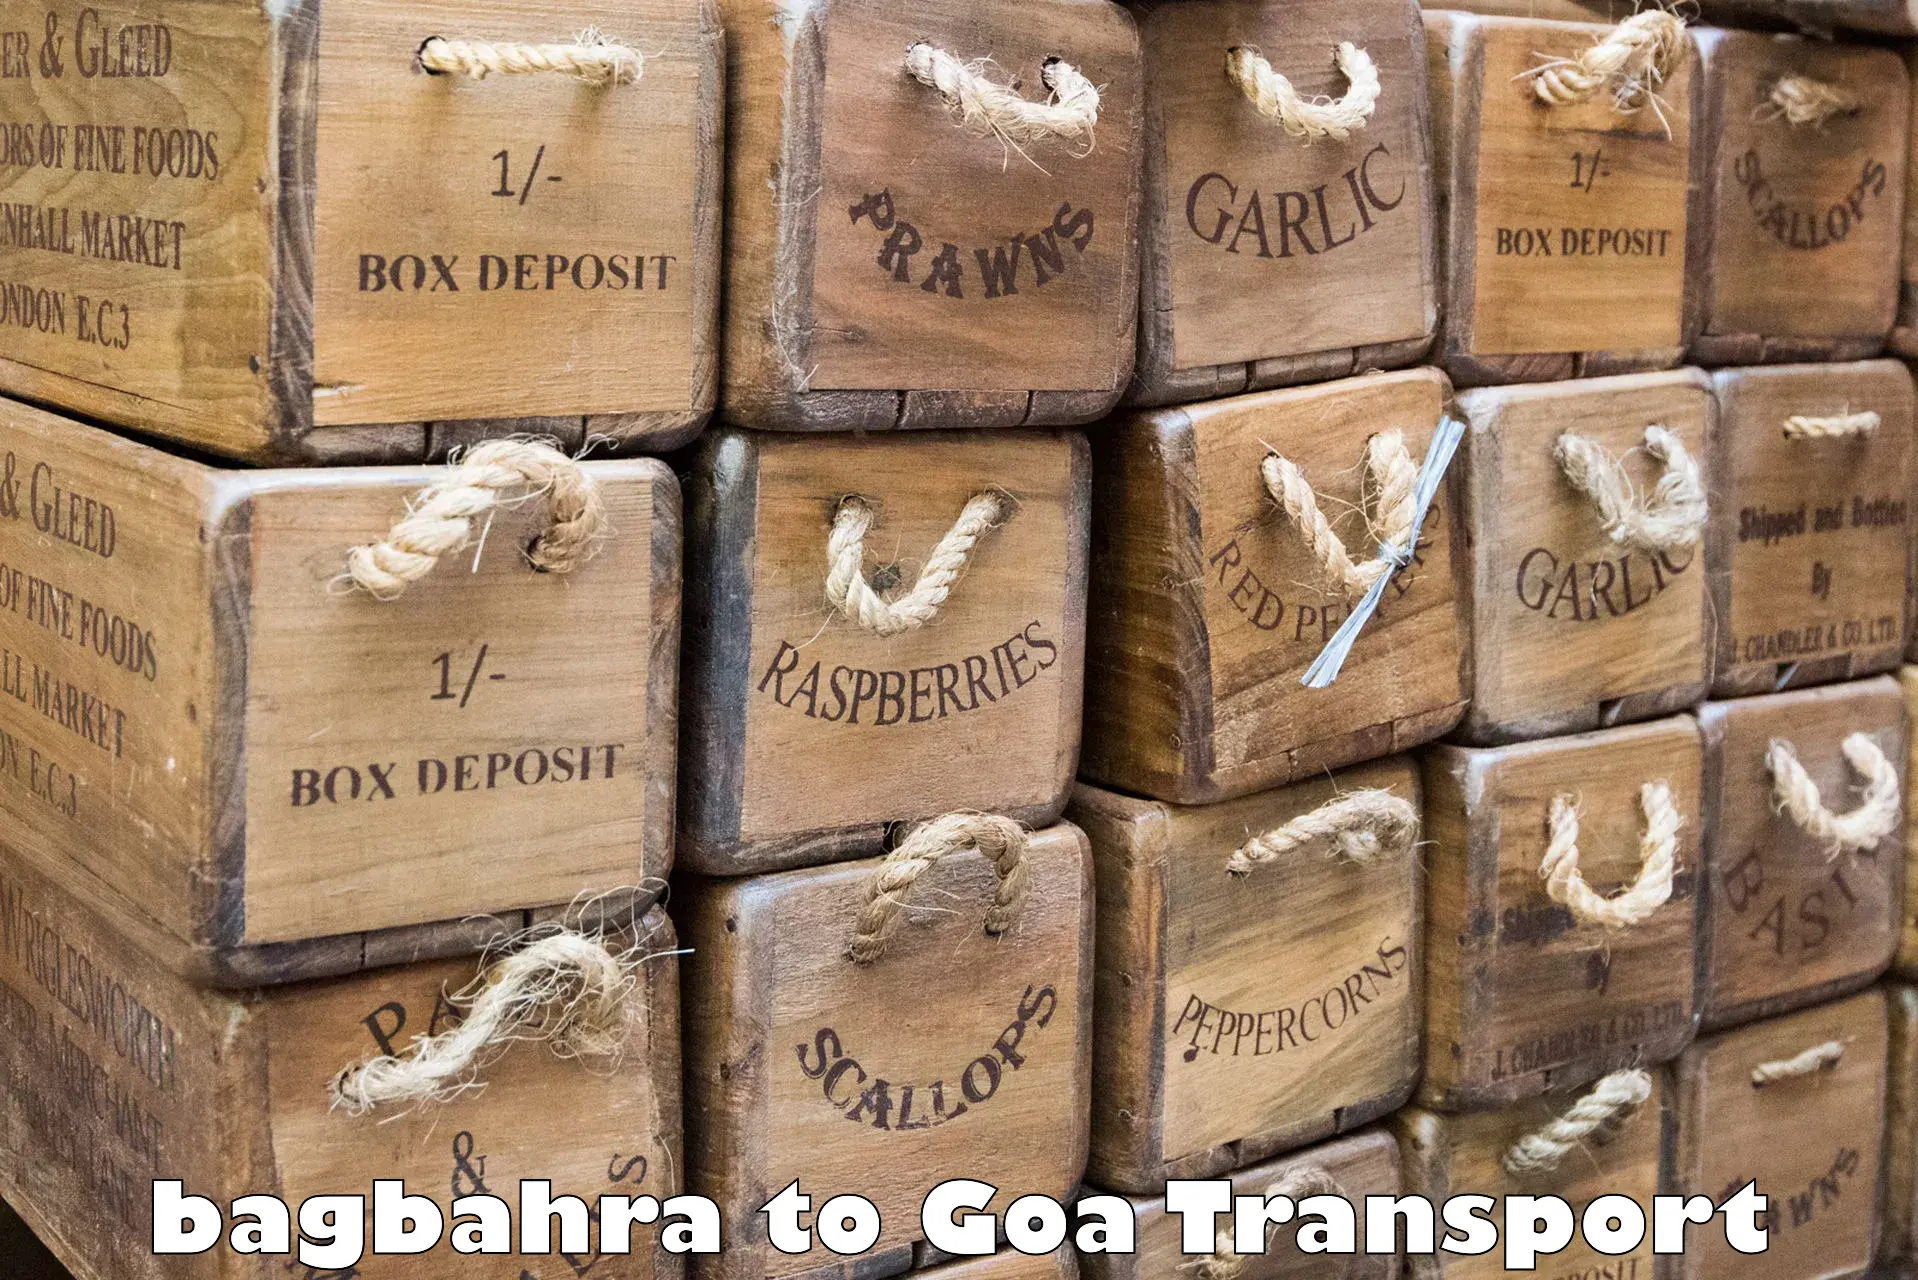 Truck transport companies in India bagbahra to Goa